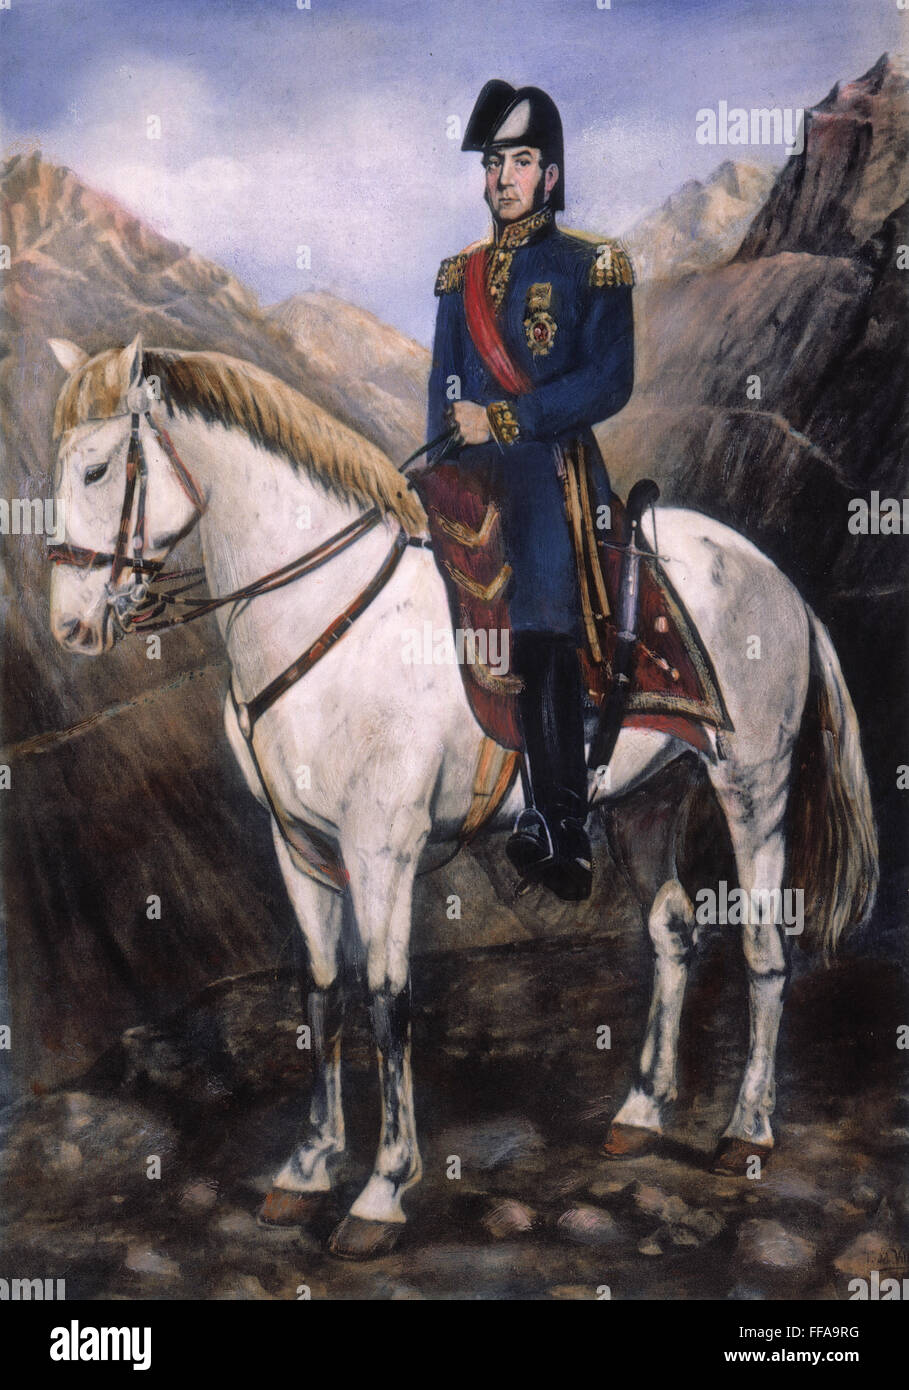 JOSE de SAN MARTIN /n(1778-1850). Argentinian soldier and statesman. After a painting by Tomas del Villar. Stock Photo